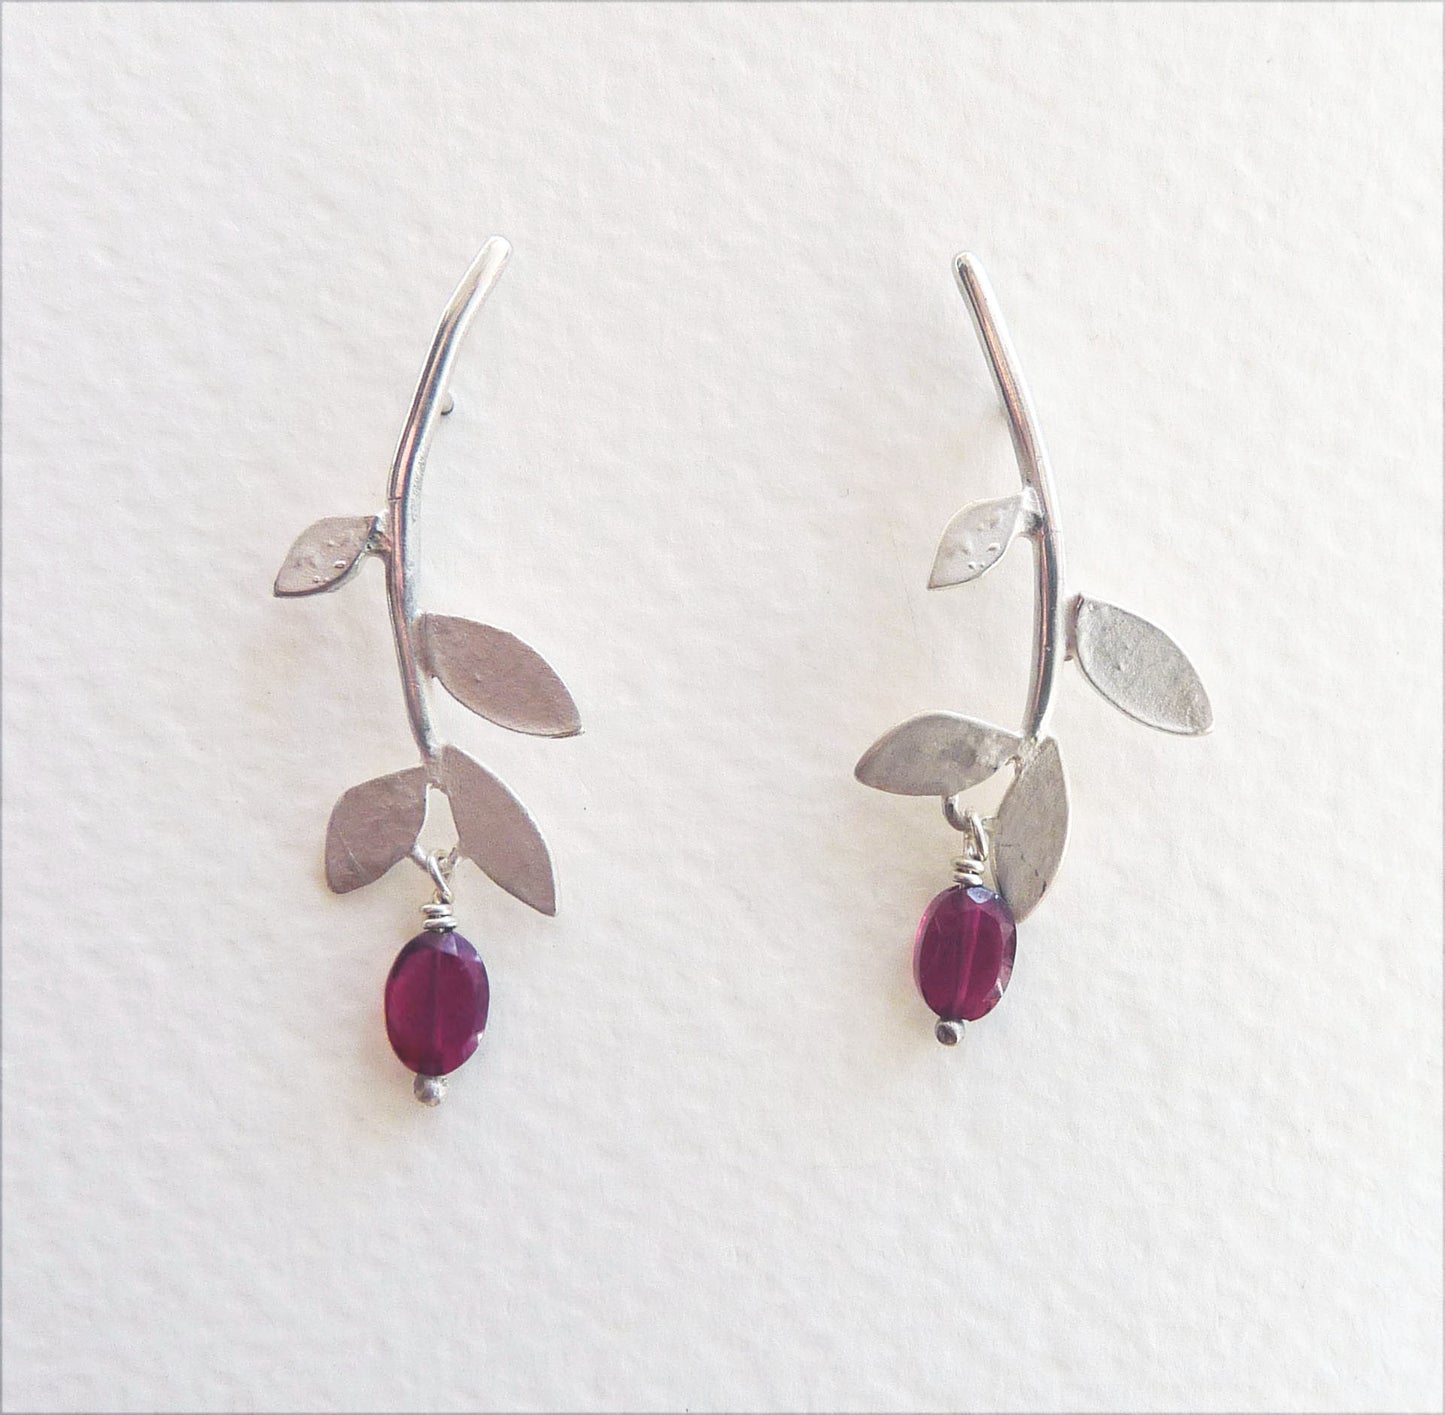 Blossoming, branch, jewellery, jewelry, earrings, studs, sterling, silver, nature, natural, leaf, leaves, peridot, rose, quartz, garnet